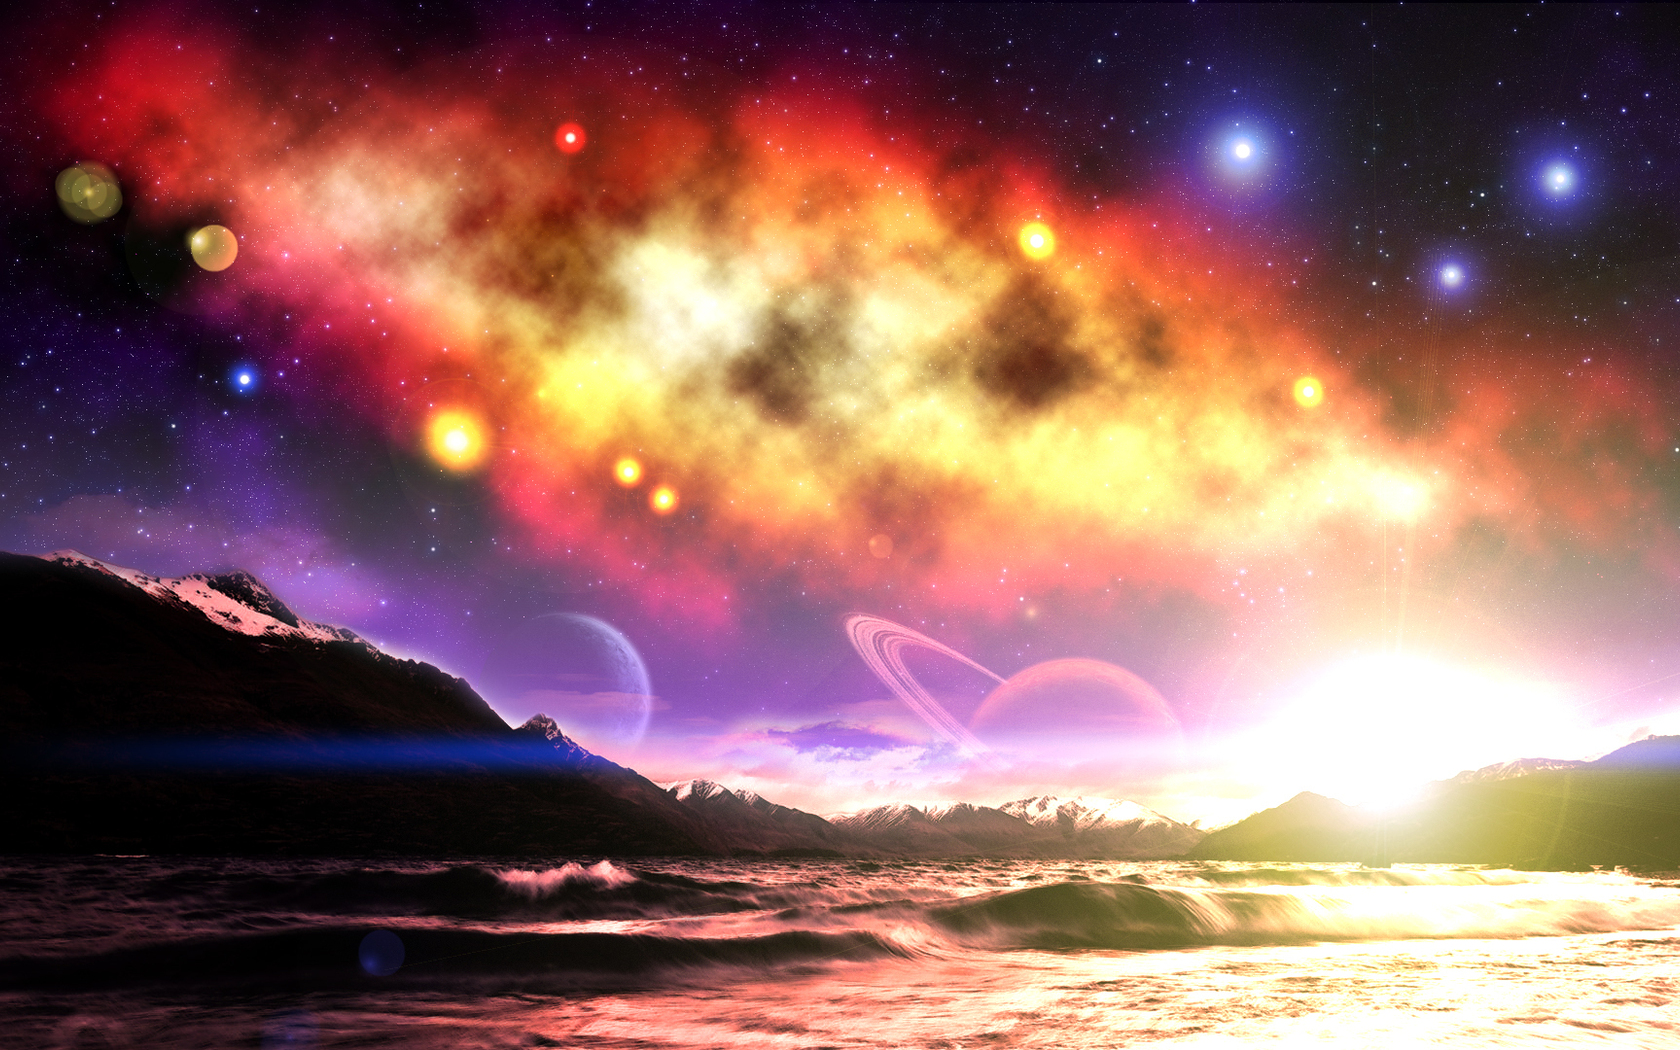 fantasy, trippy, sky, artistic, psychedelic, mountain, planet, sci fi, space, star